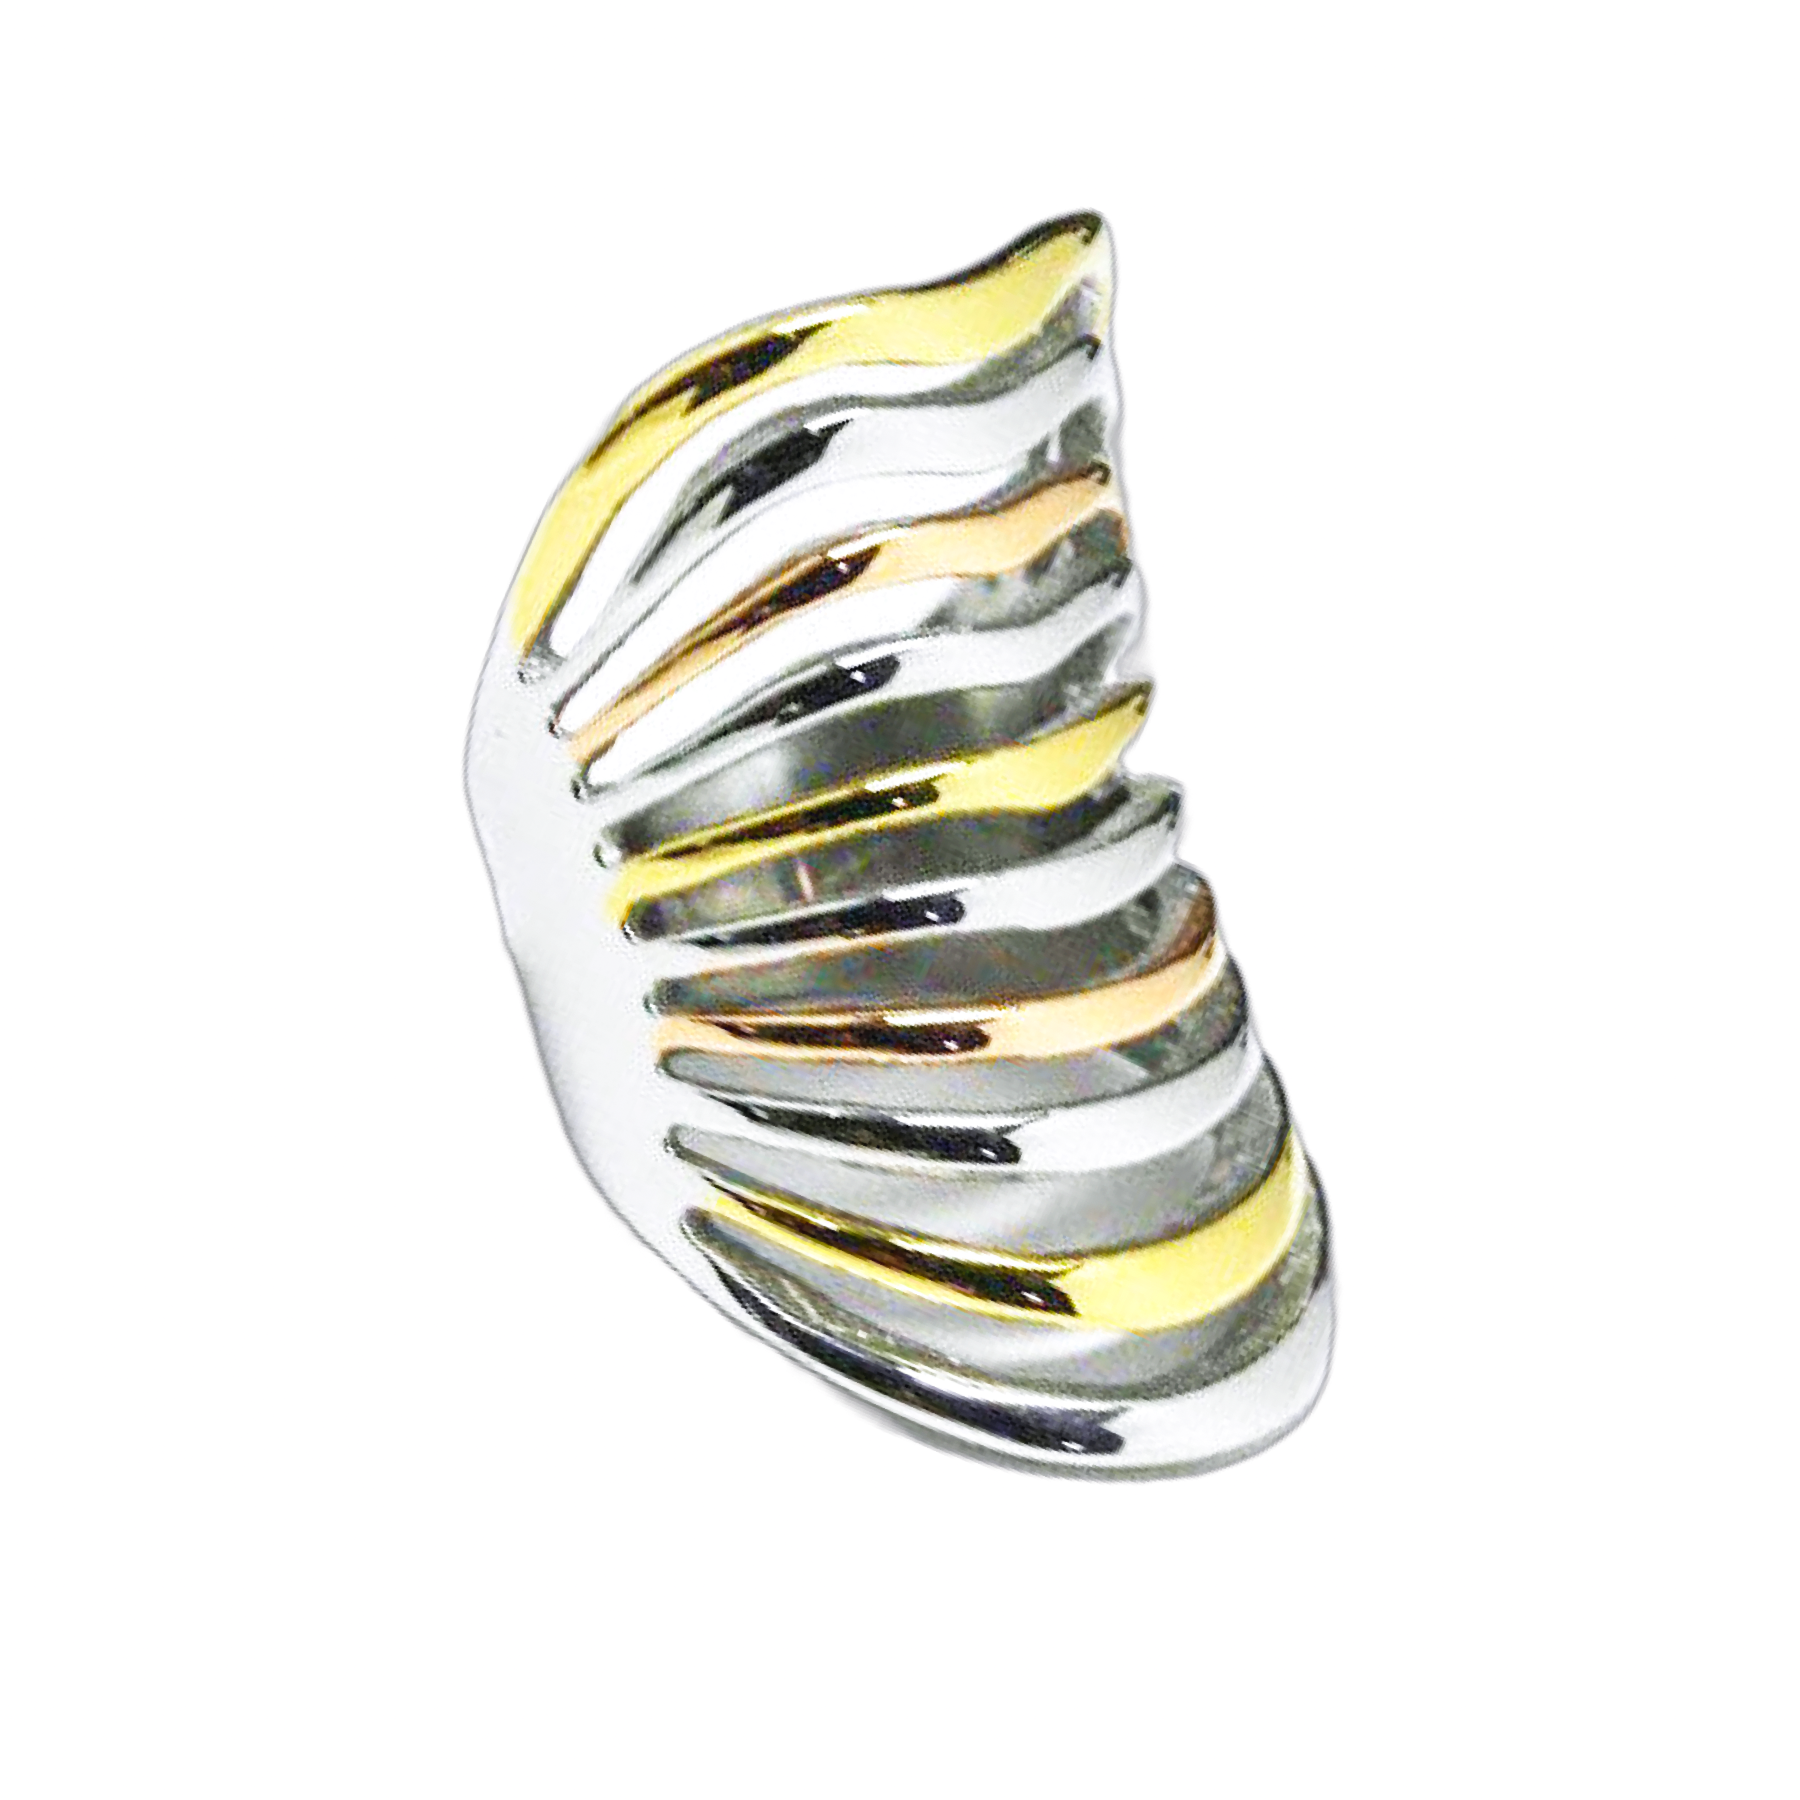 Stainess Steel Three Tone Armor Cage Knuckle Ring